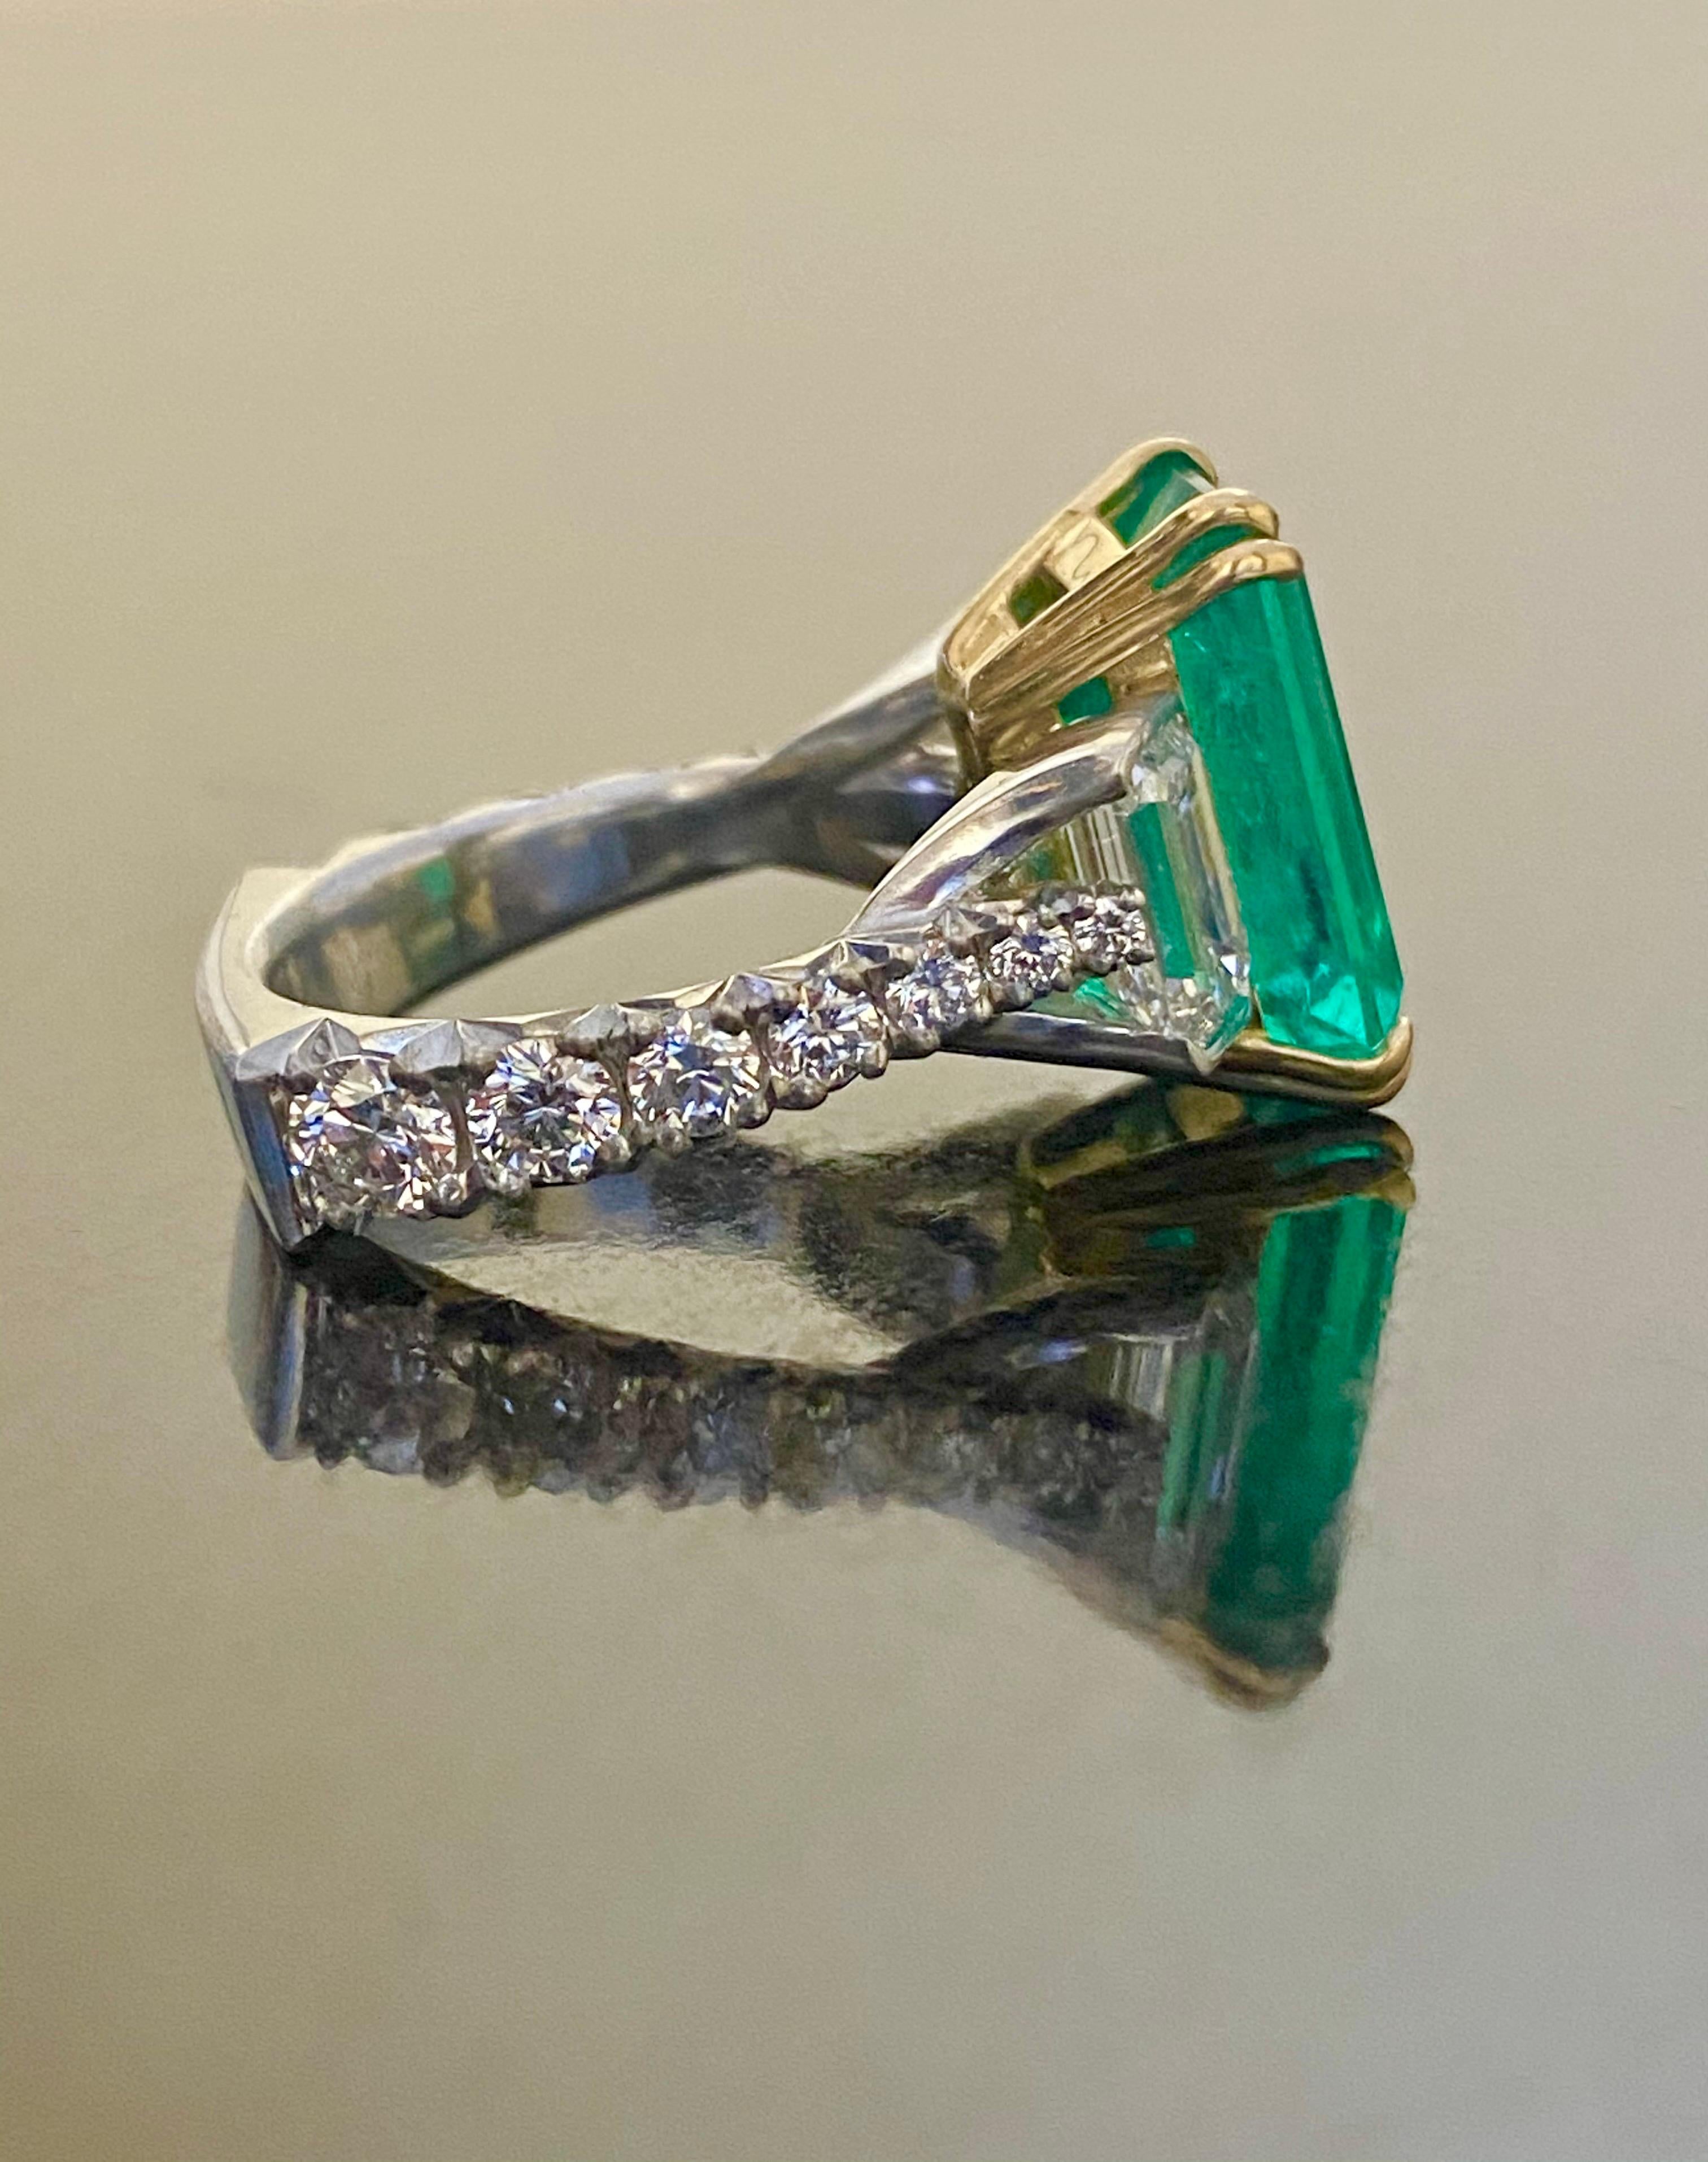 Platinum French Pave Emerald Cut Diamond 6.78 Carat GIA Colombian Emerald Ring In New Condition For Sale In Los Angeles, CA